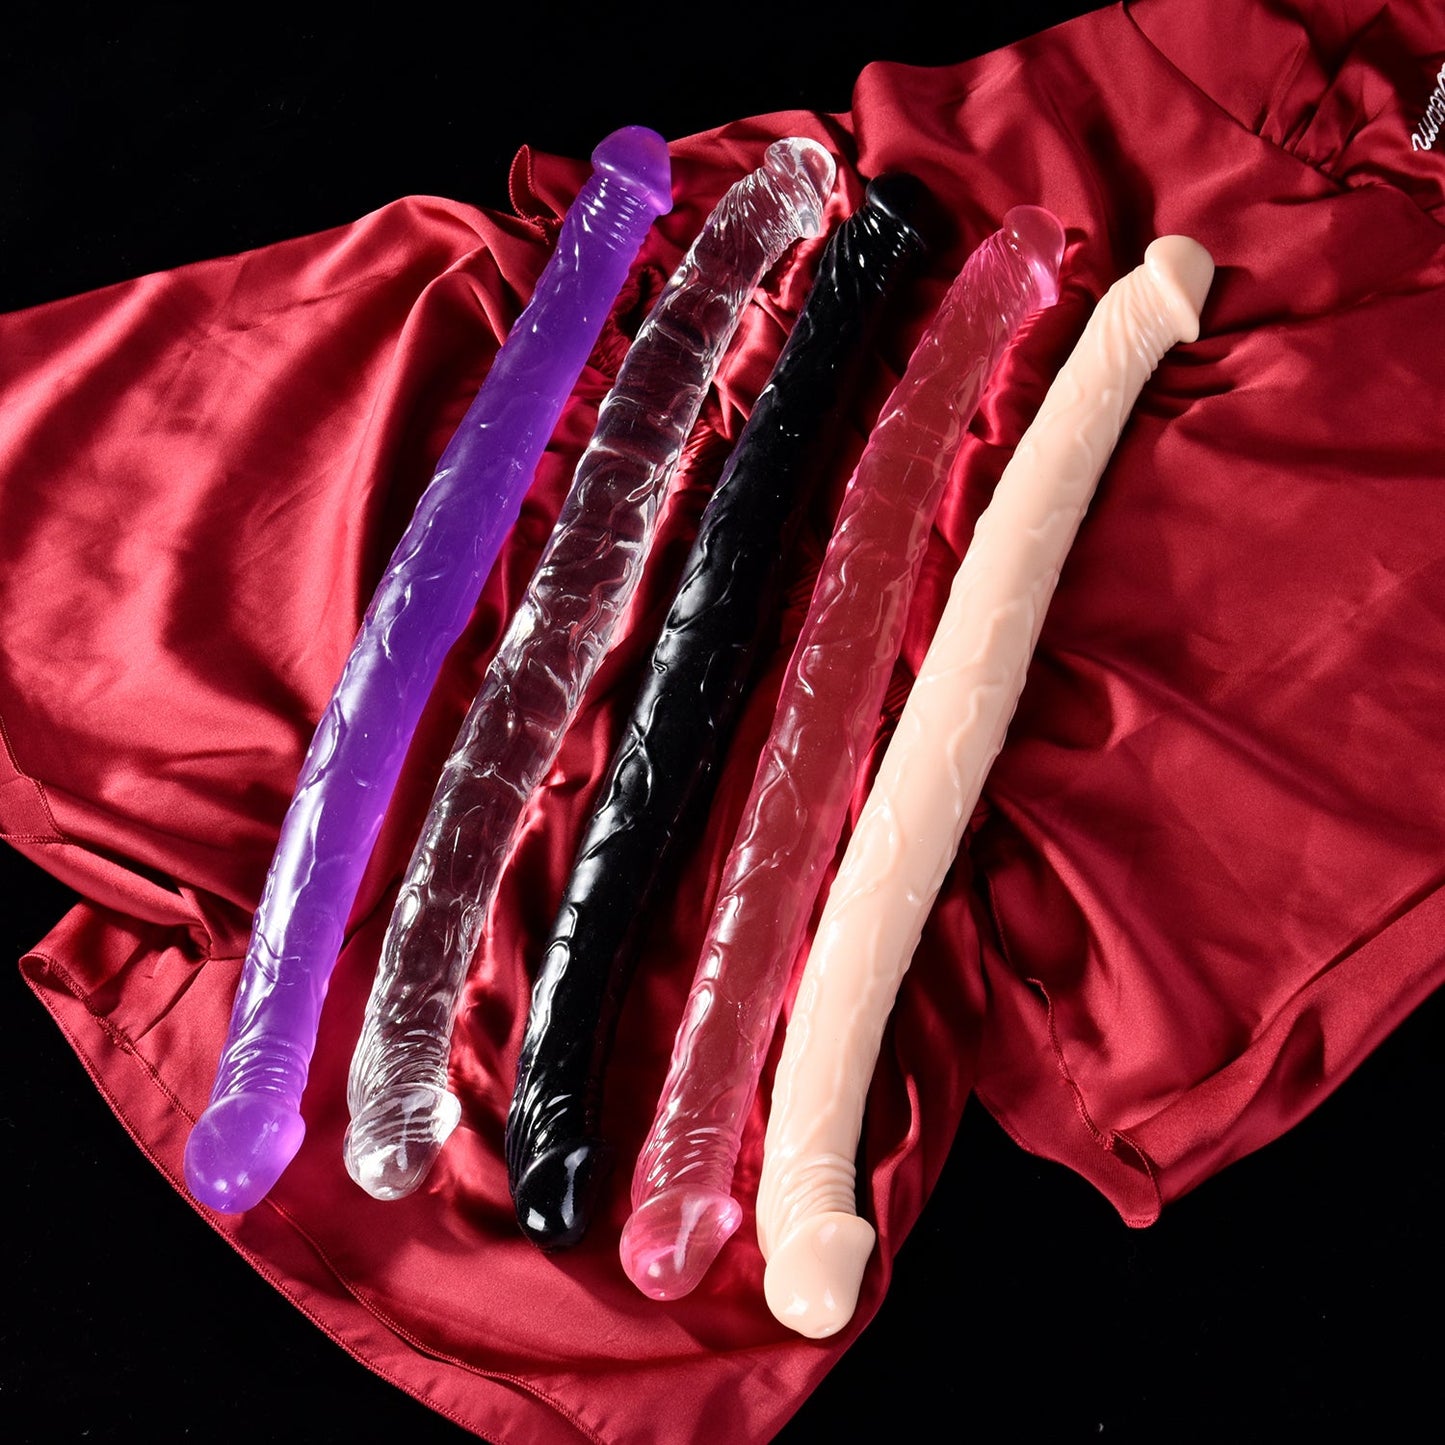 The Johnson 16 Inch Silicone Double Ended Monster Dildo